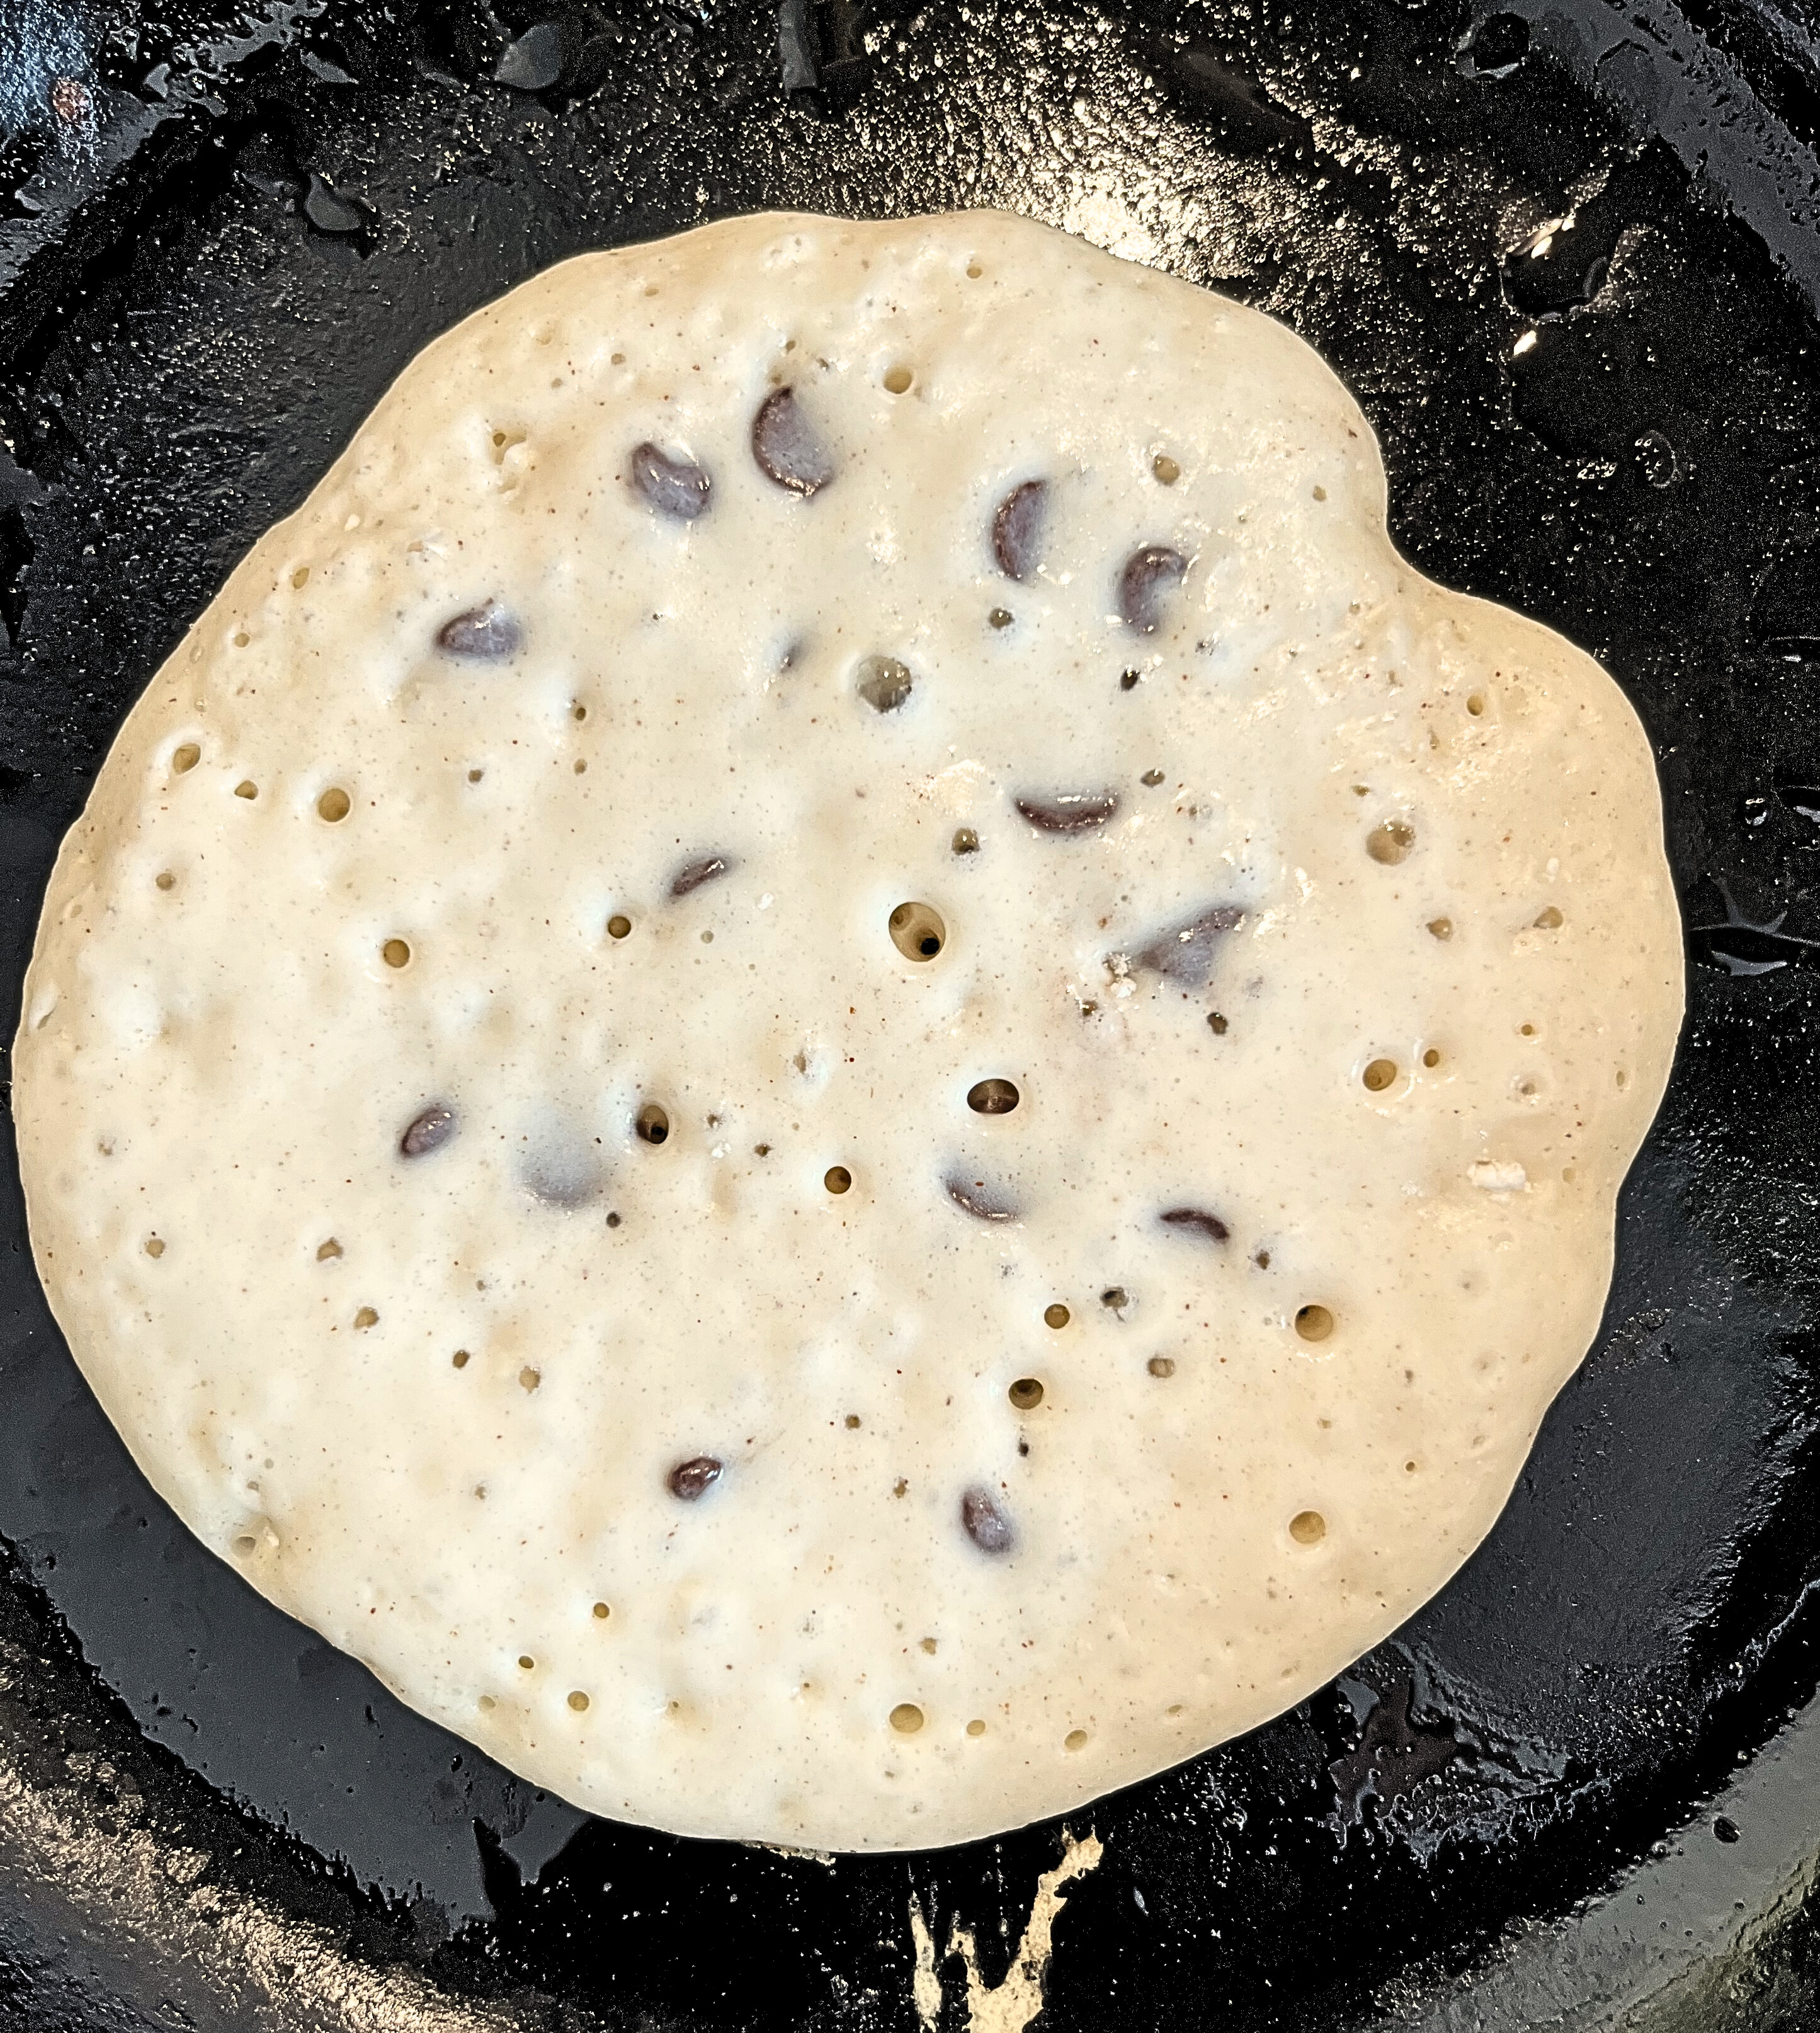 Cooking pancake batter with chocolate chips in it on a cast iron pan.